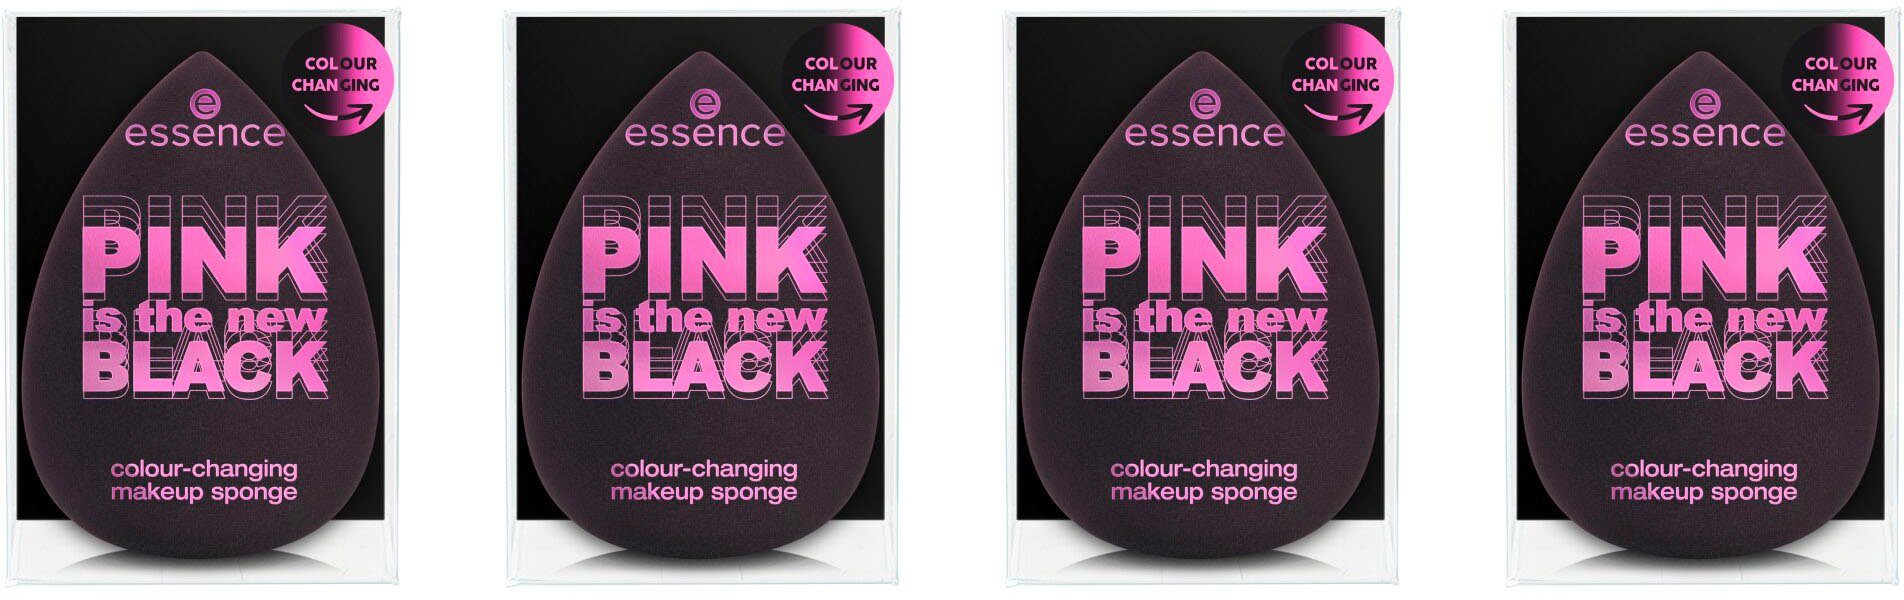 makeup Colour-changing Schwamm the Make-up Essence BLACK colour-changing is new PINK sponge,